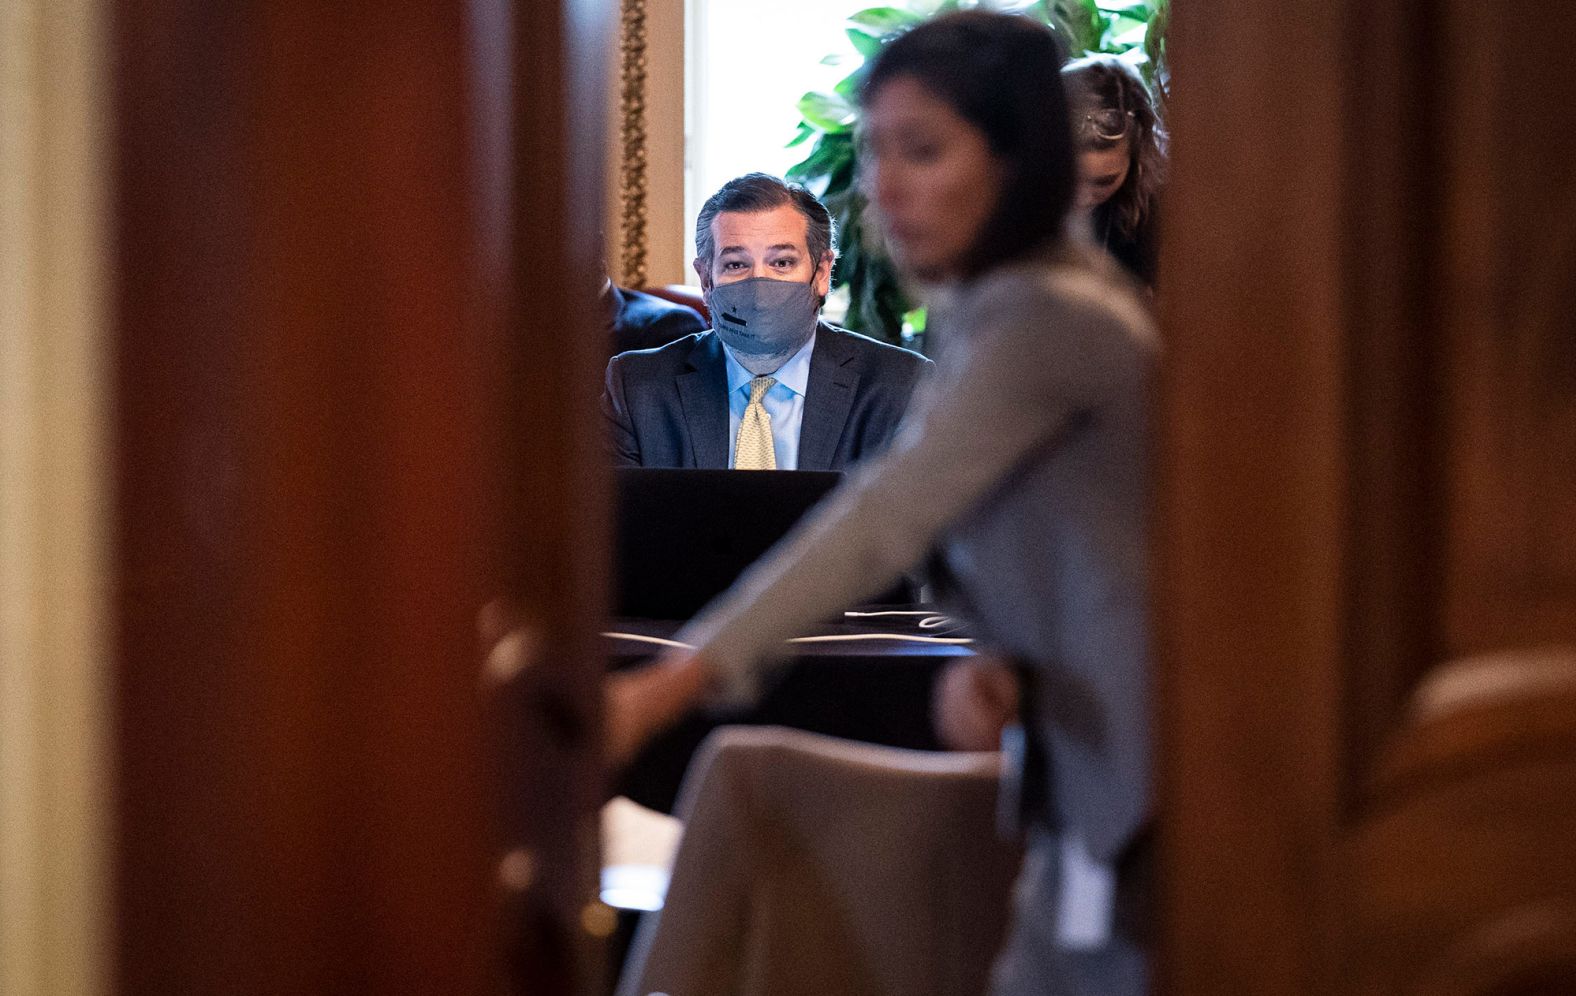 US Sen. Ted Cruz sits in front of a computer as he meets with Donald Trump's lawyers during a break in the trial on Friday. Cruz was part of a group of Republican senators <a href="https://www.cnn.com/politics/live-news/trump-impeachment-trial-02-12-2021/h_f4d65af9a101e1eca296adb937436e76" target="_blank">who had been actively counseling the Trump legal team.</a>